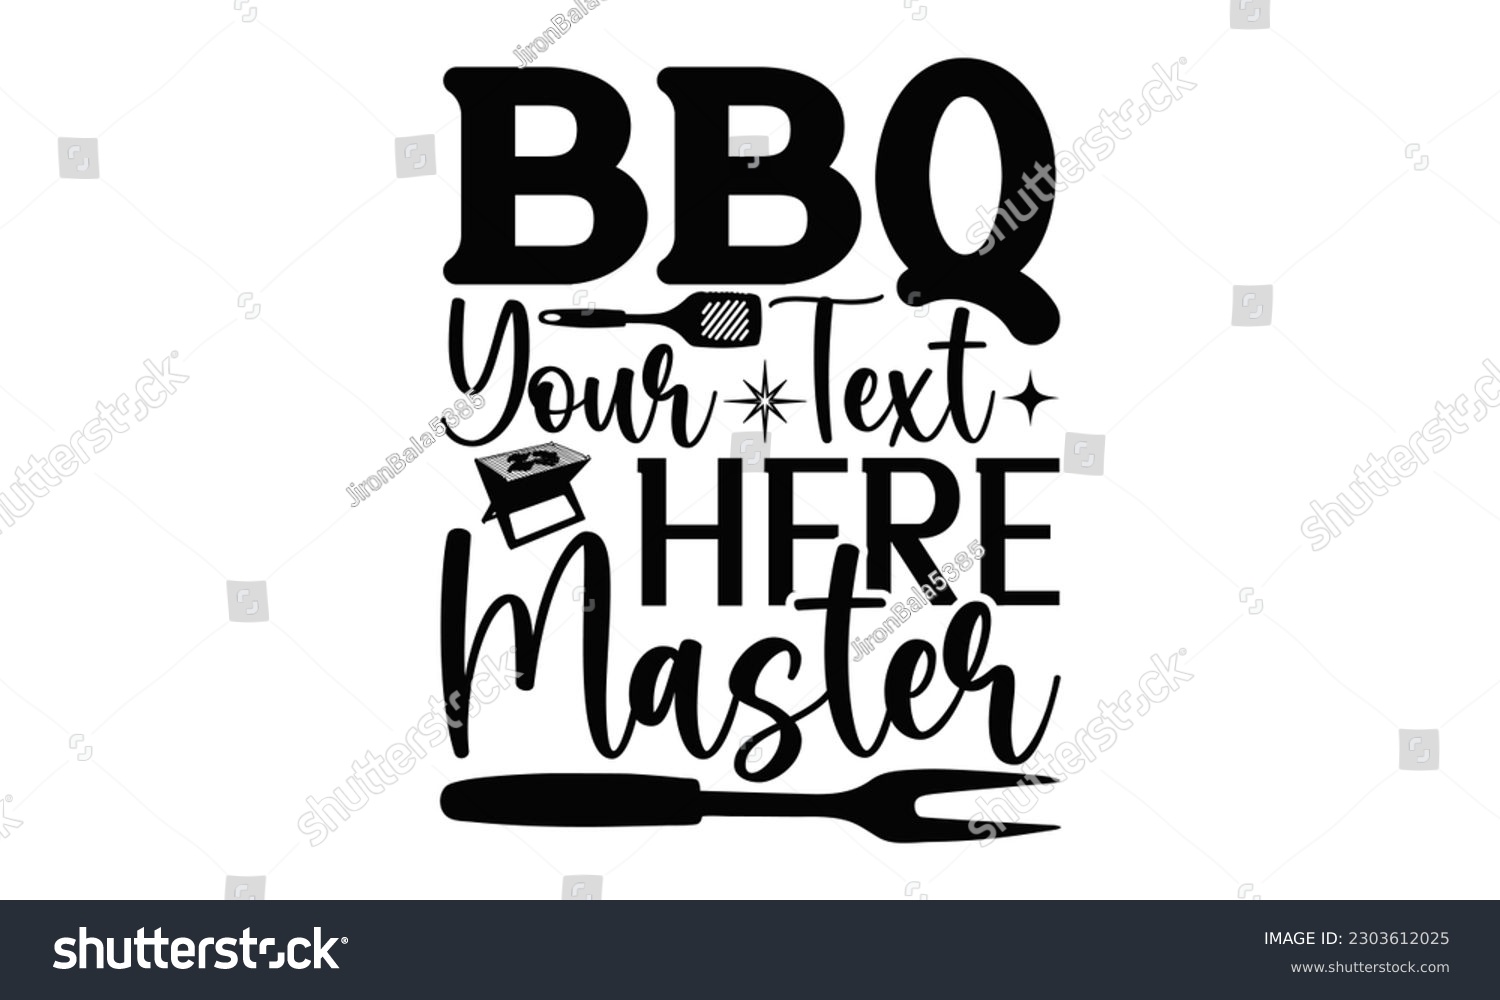 SVG of Bbq Your Text Here Master - Barbecue SVG Design, Hand drawn lettering phrase, Illustration  for prints on t-shirts, bags, posters, cards, Mug, and EPS, Files Cutting .
 svg